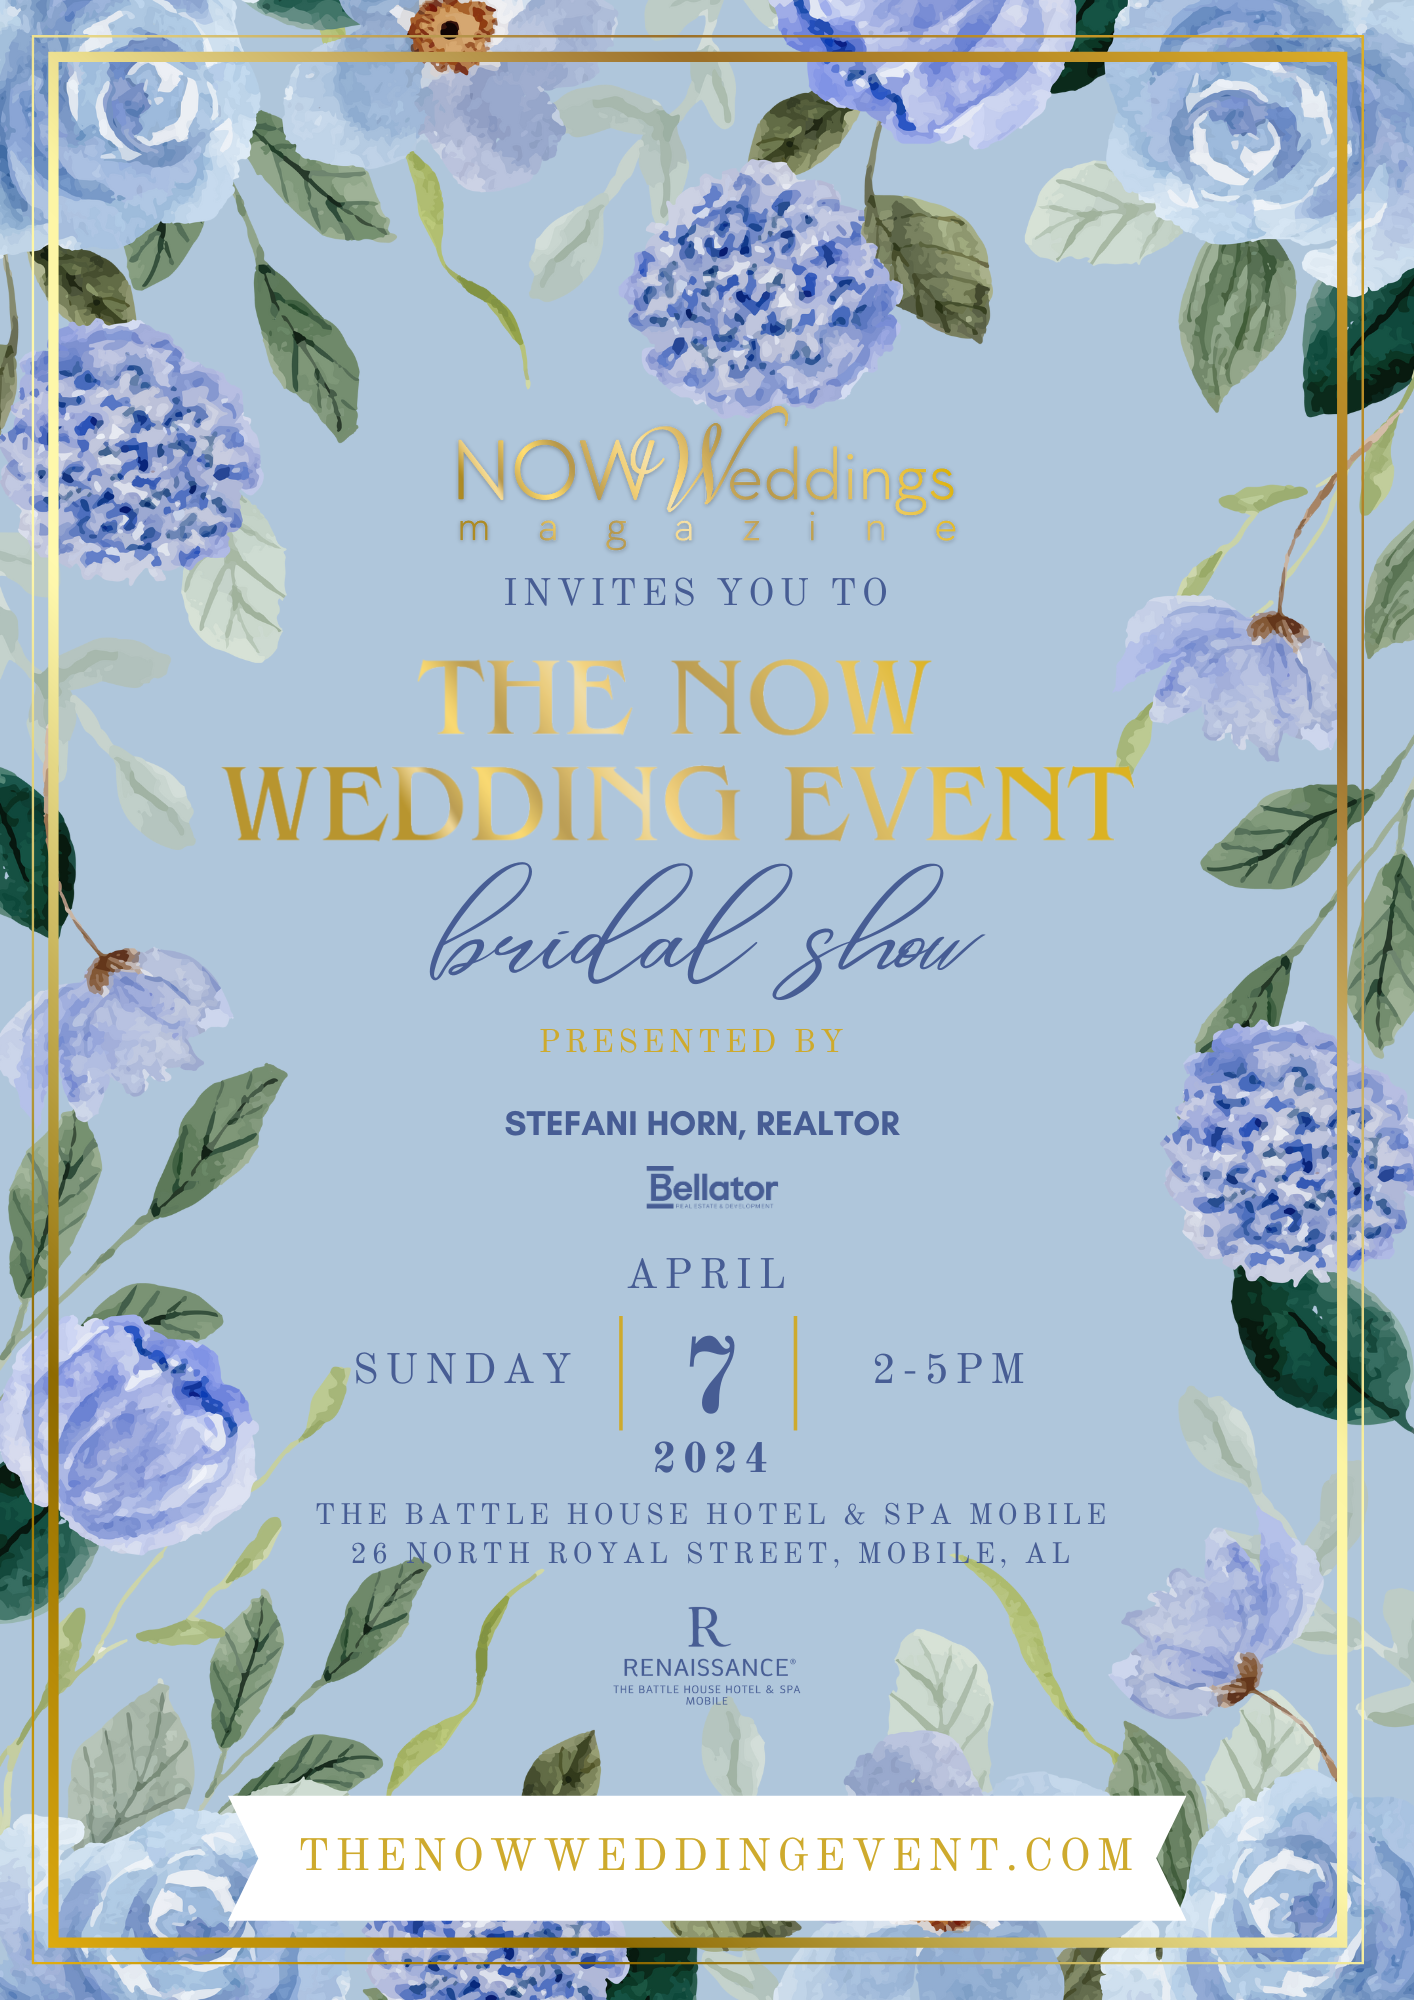 April 7, 2024 NOW Wedding Event Bridal Show at The Battle House Hotel & Spa in Mobile, Alabama